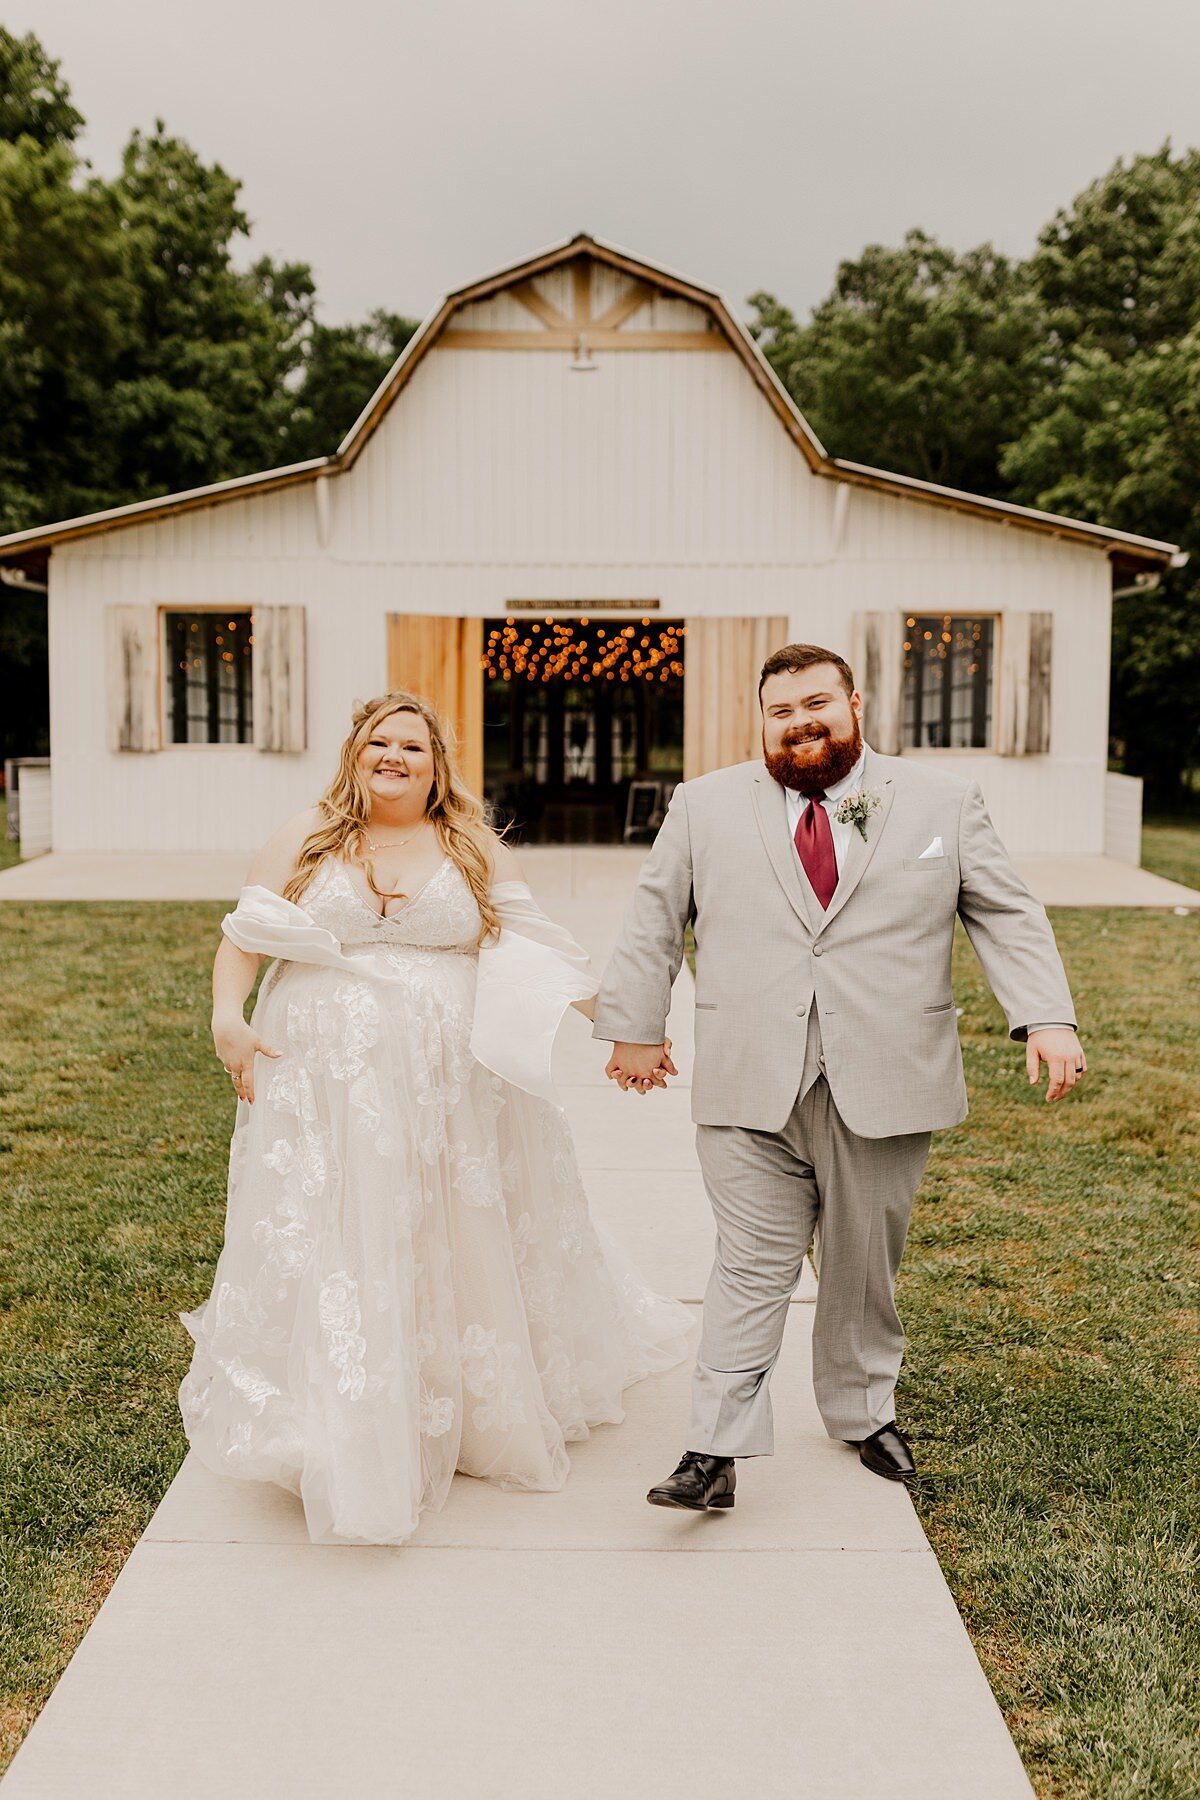 The plus size bride wearing a flowing organza gown walked down the aisle beside her plus size groom wearing a light gray suit